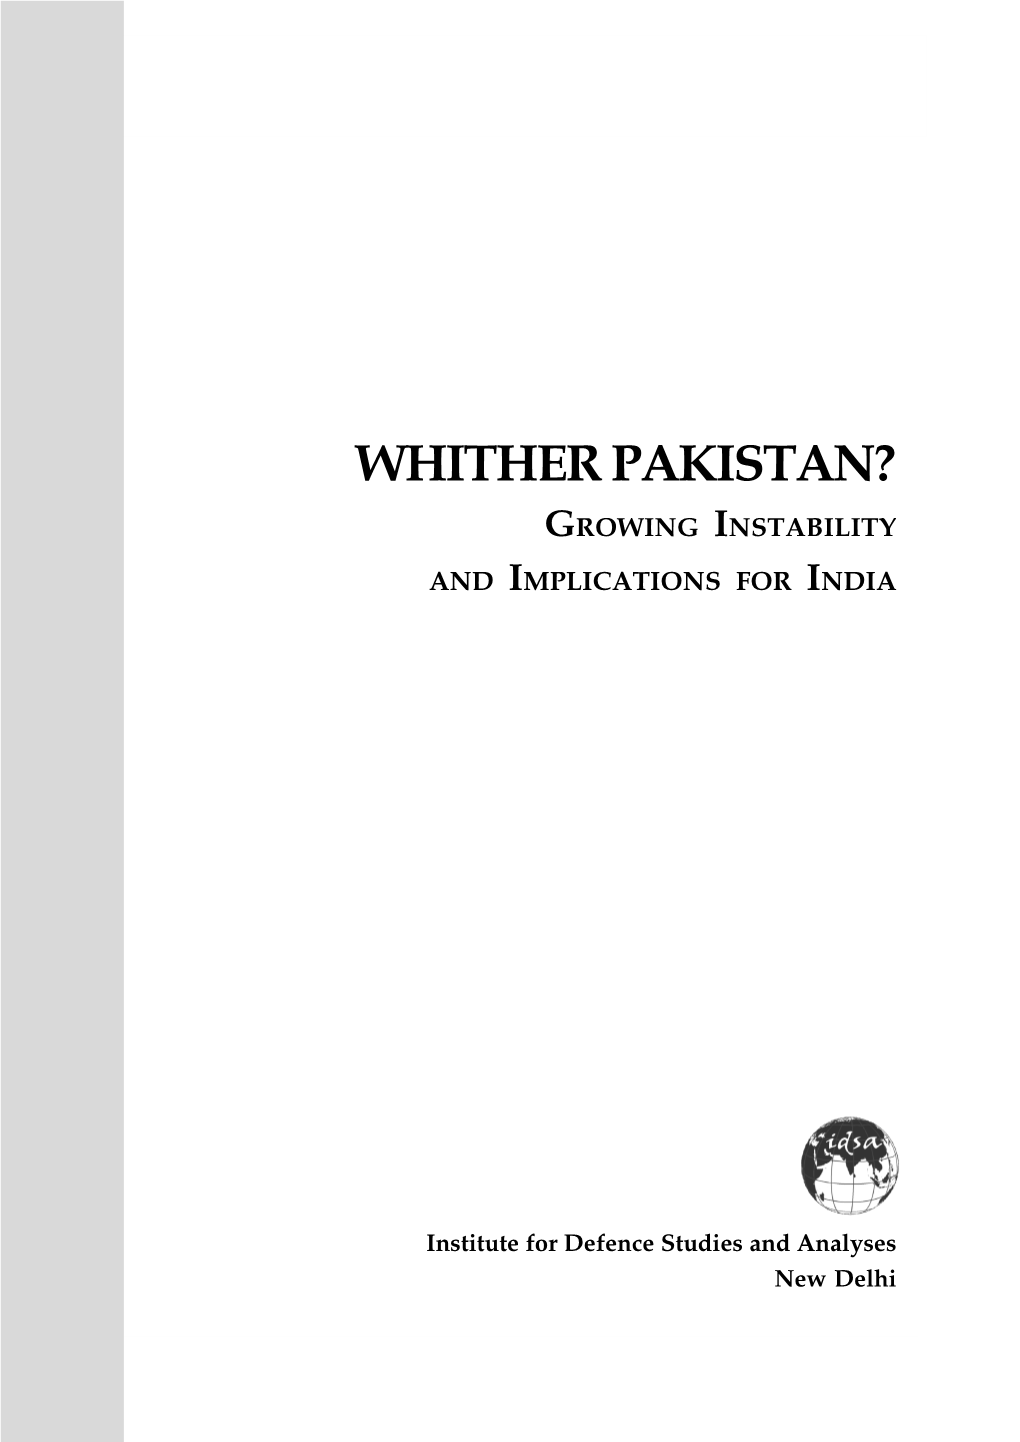 Whither Pakistan? Growing Instability and Implications for India